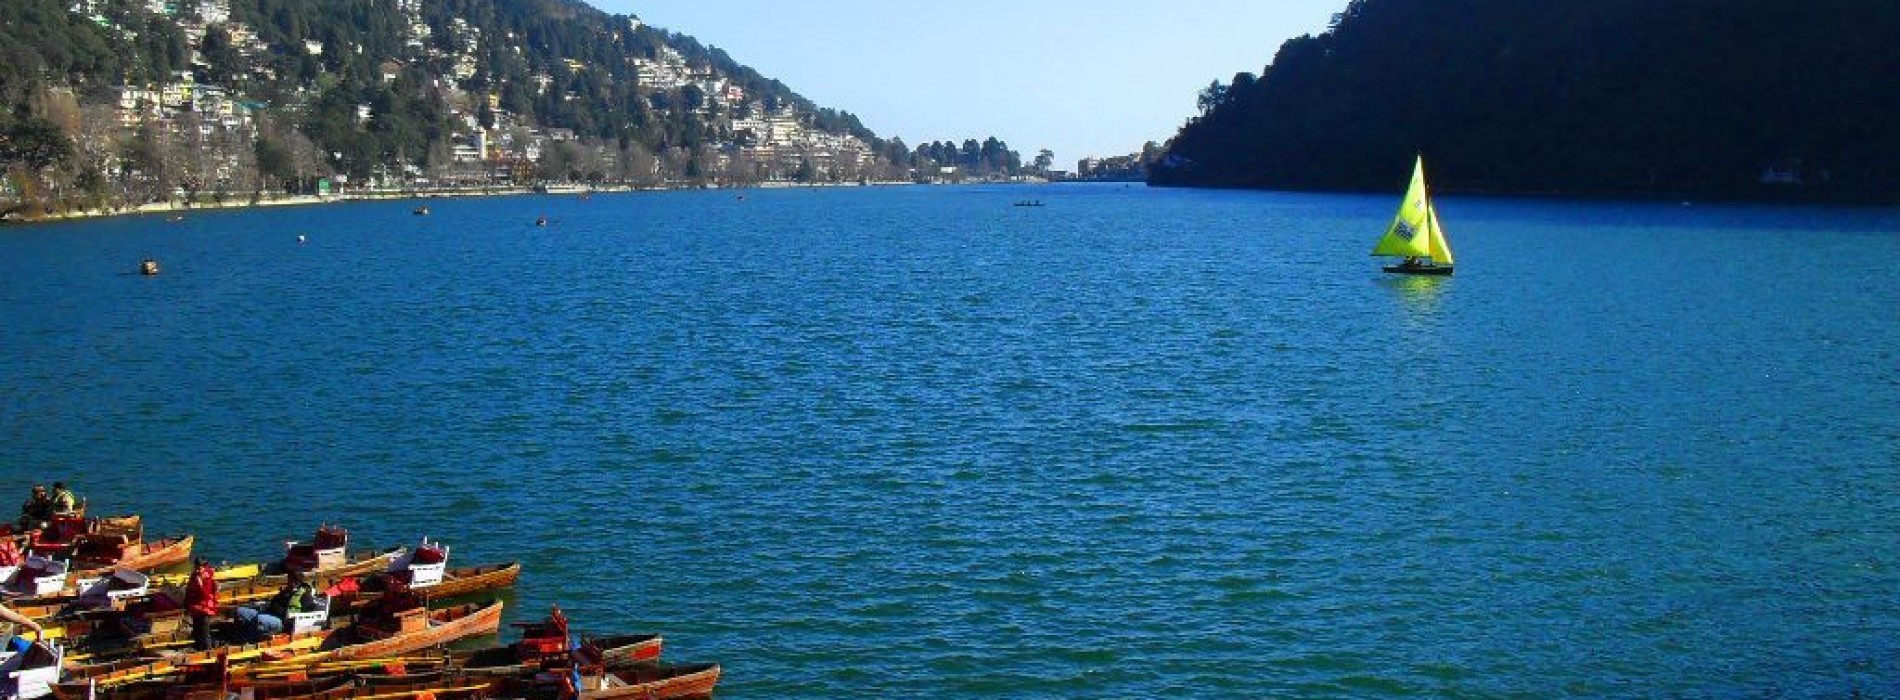 Nainital declared ‘housefull’ to curb tourist inflow